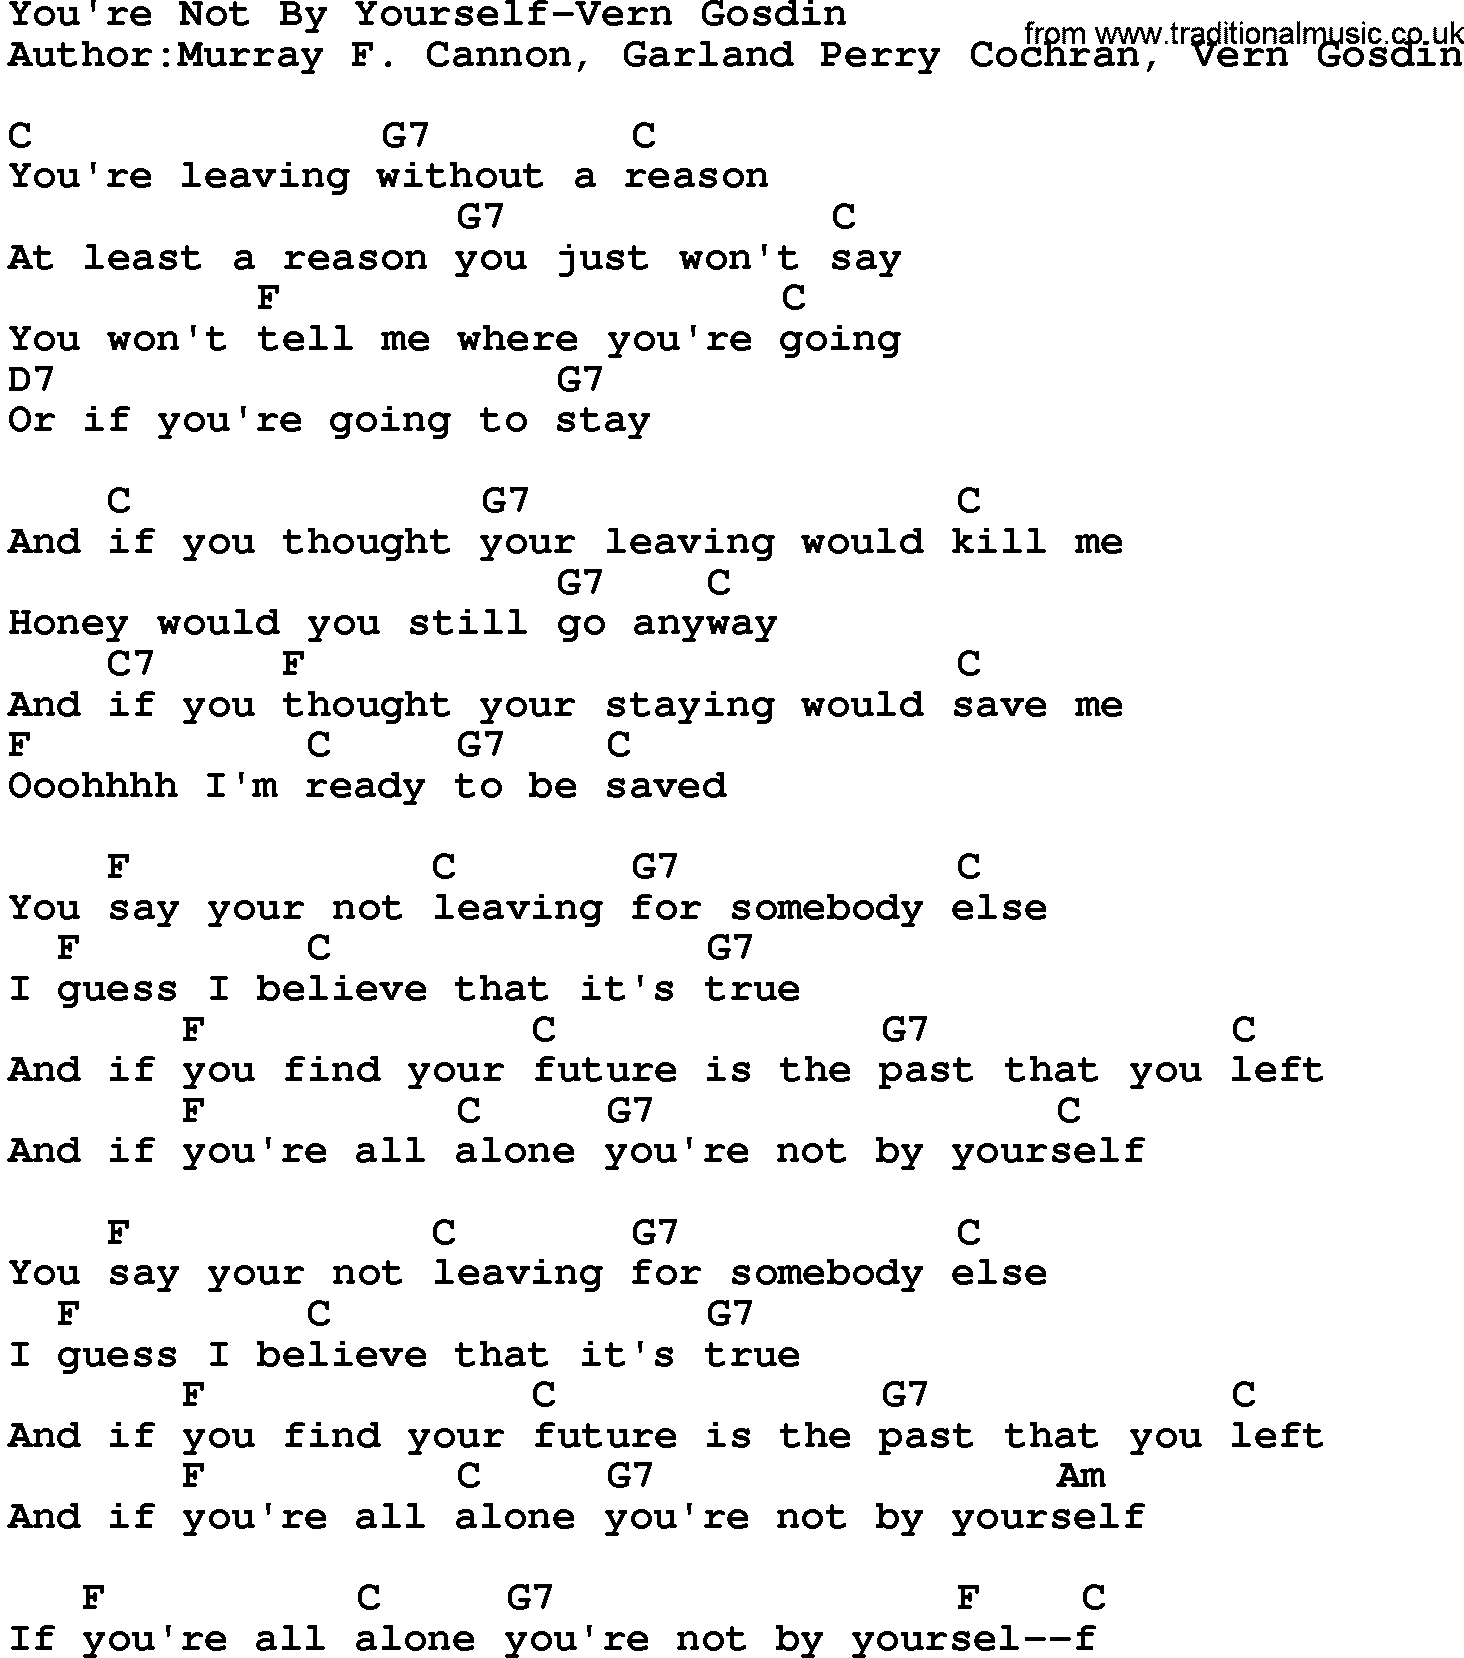 Country music song: You're Not By Yourself-Vern Gosdin lyrics and chords